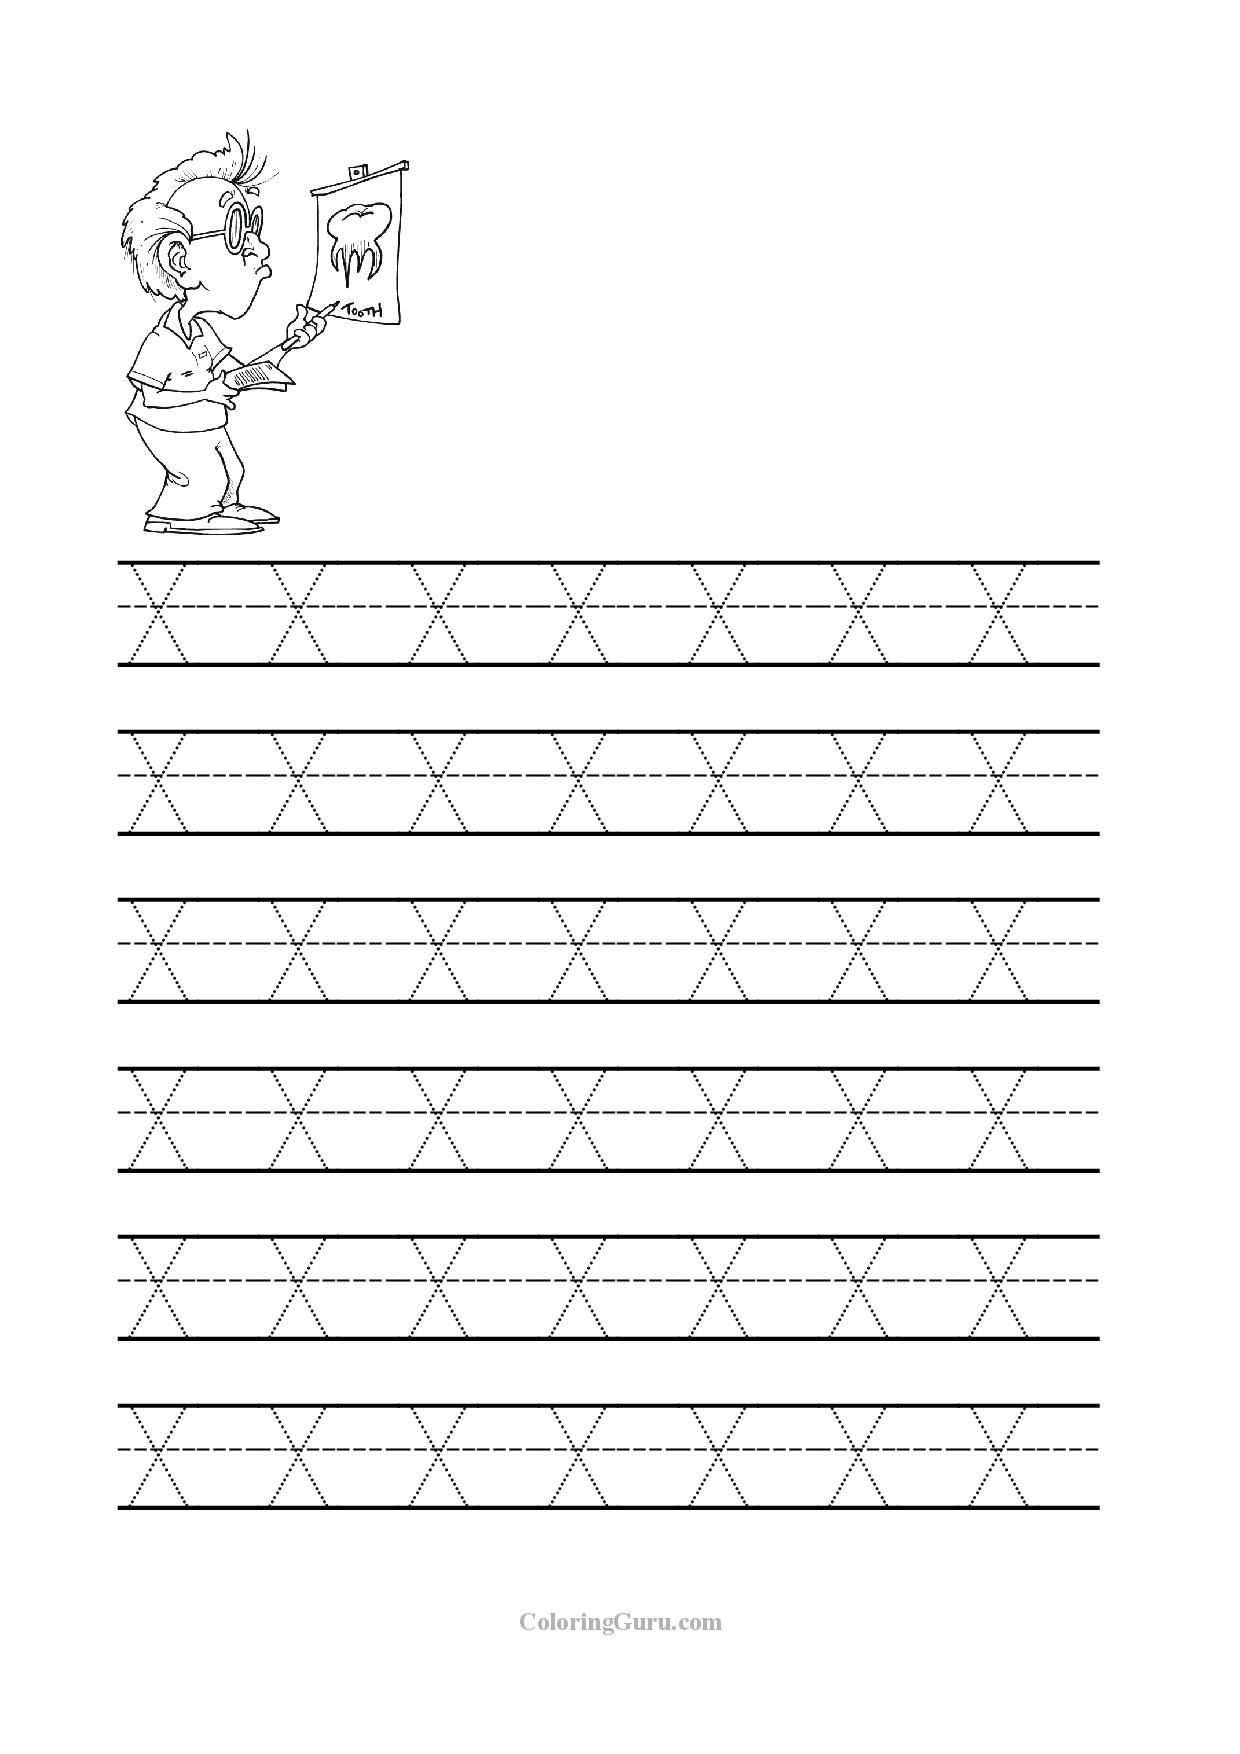 Free Printable Tracing Letter X Worksheets For Preschool in Letter X Worksheets Free